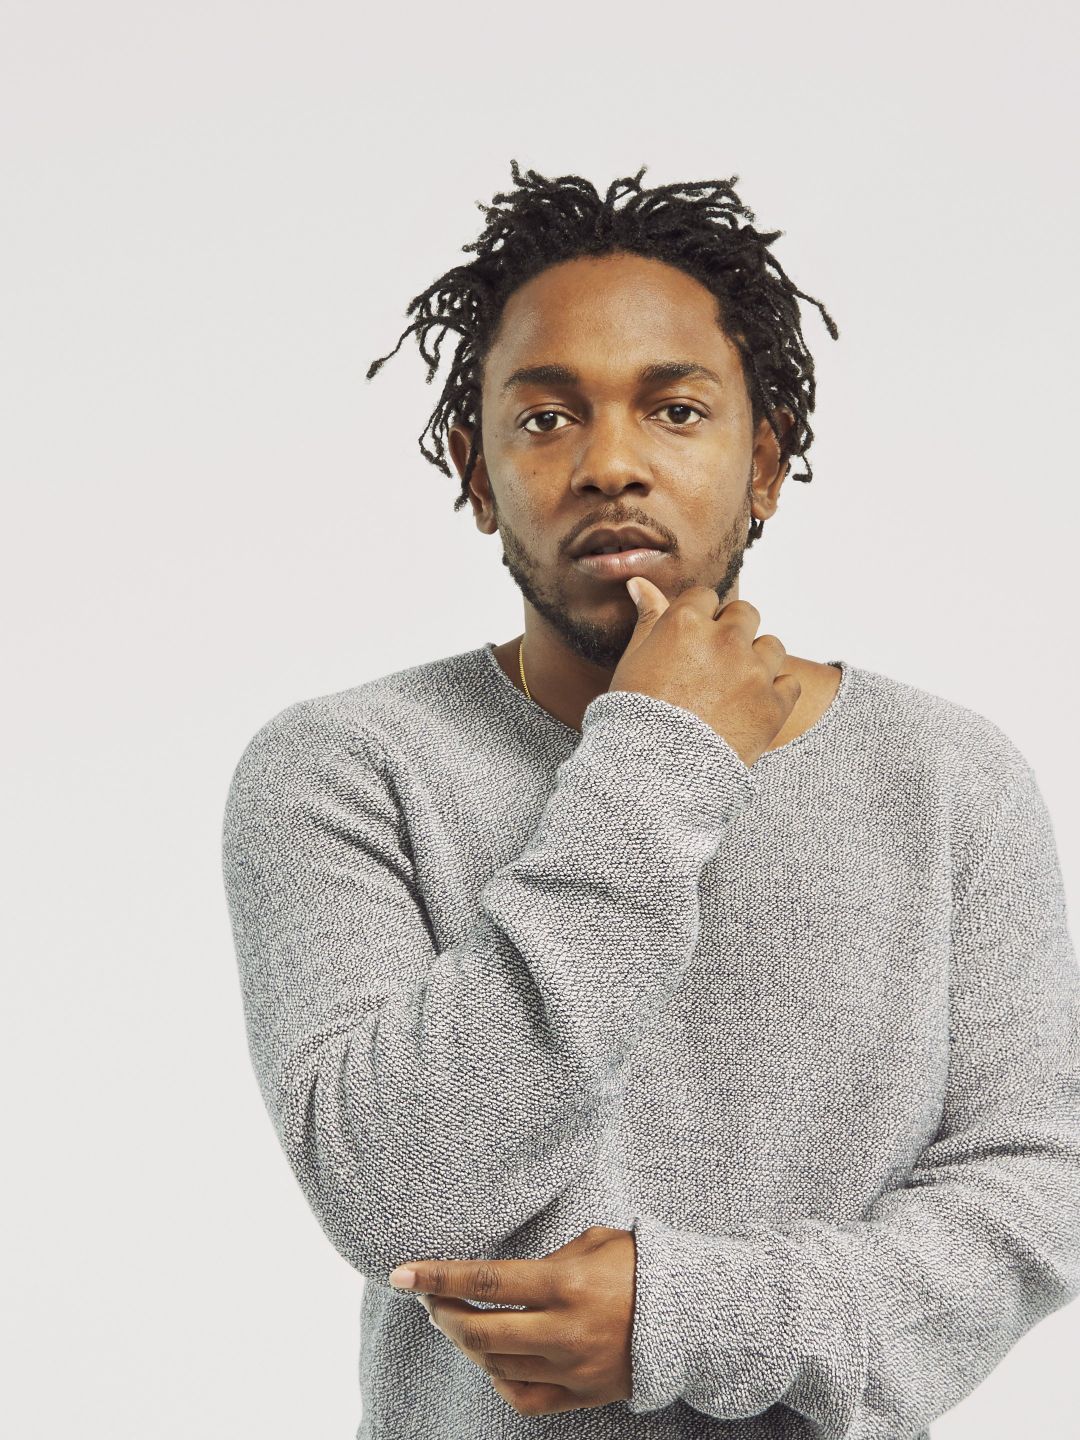 Kendrick Lamar how did he became famous